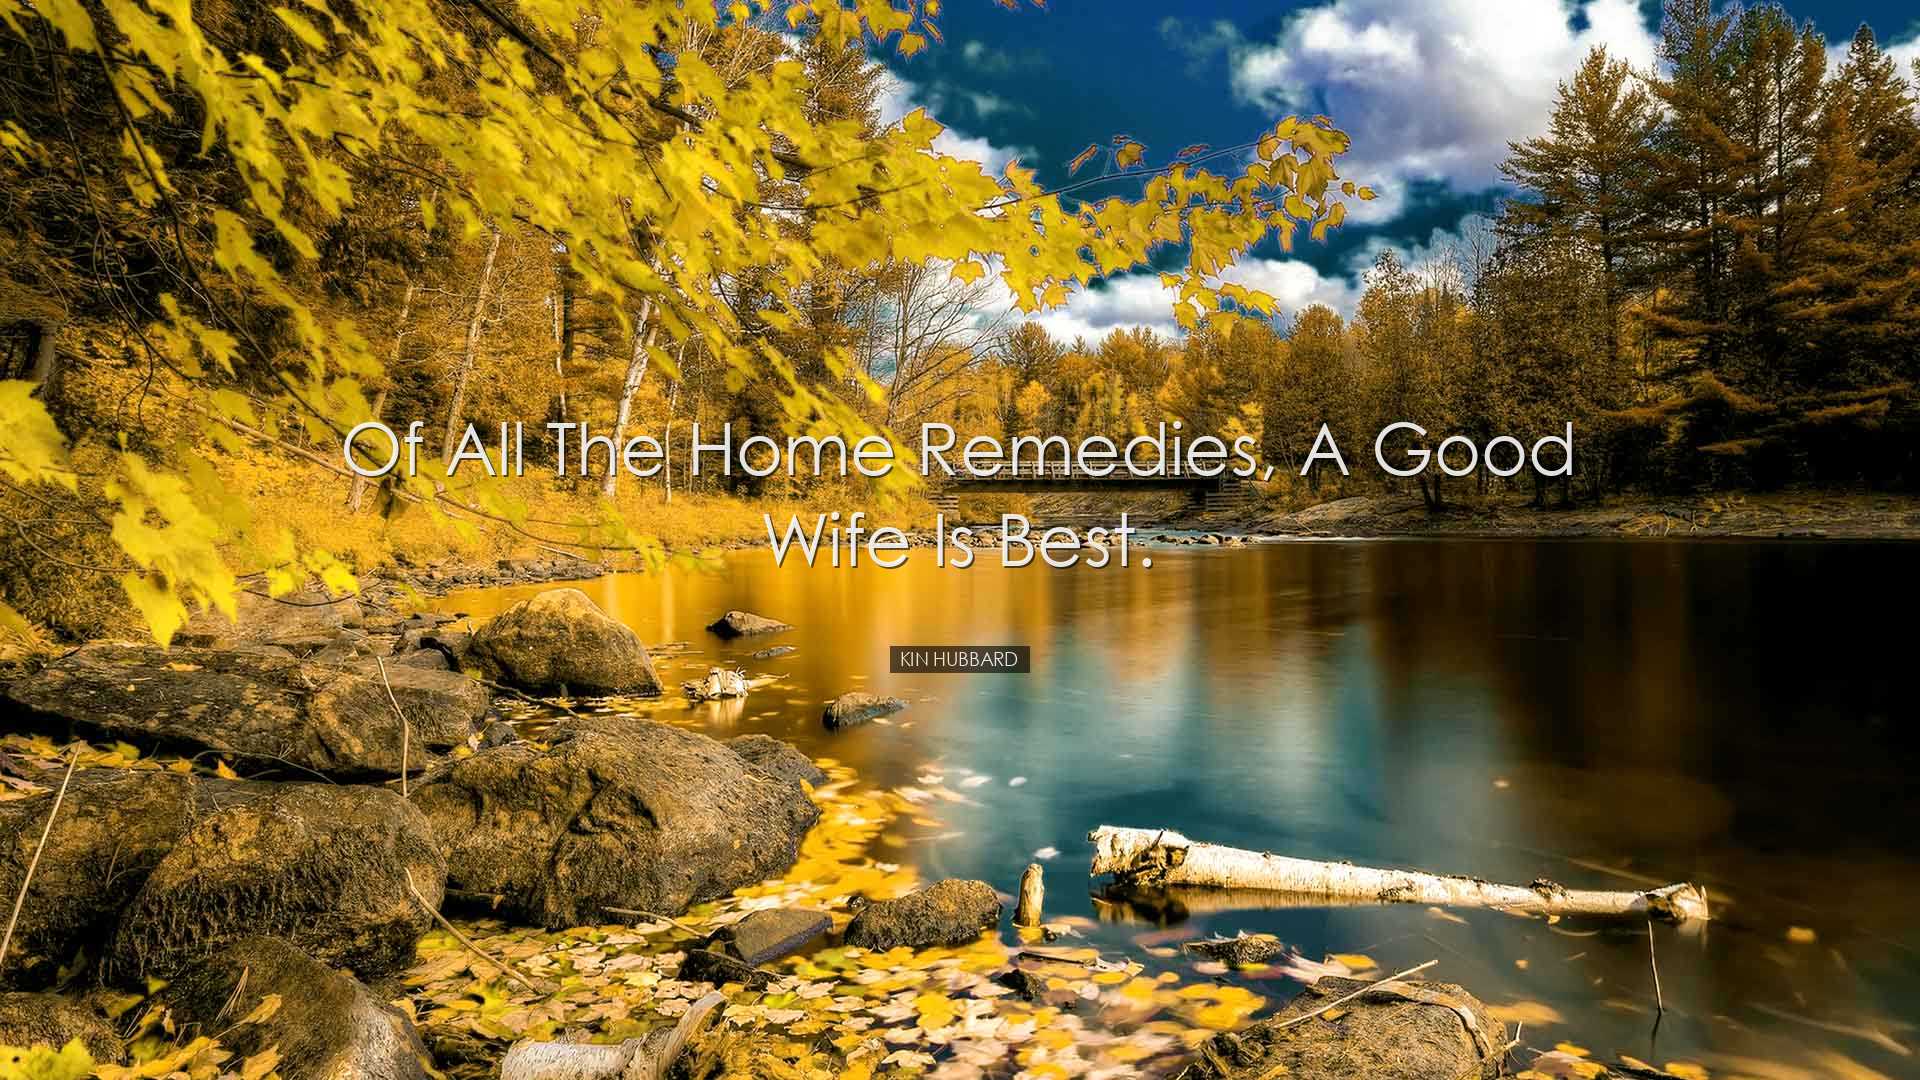 Of all the home remedies, a good wife is best. - Kin Hubbard